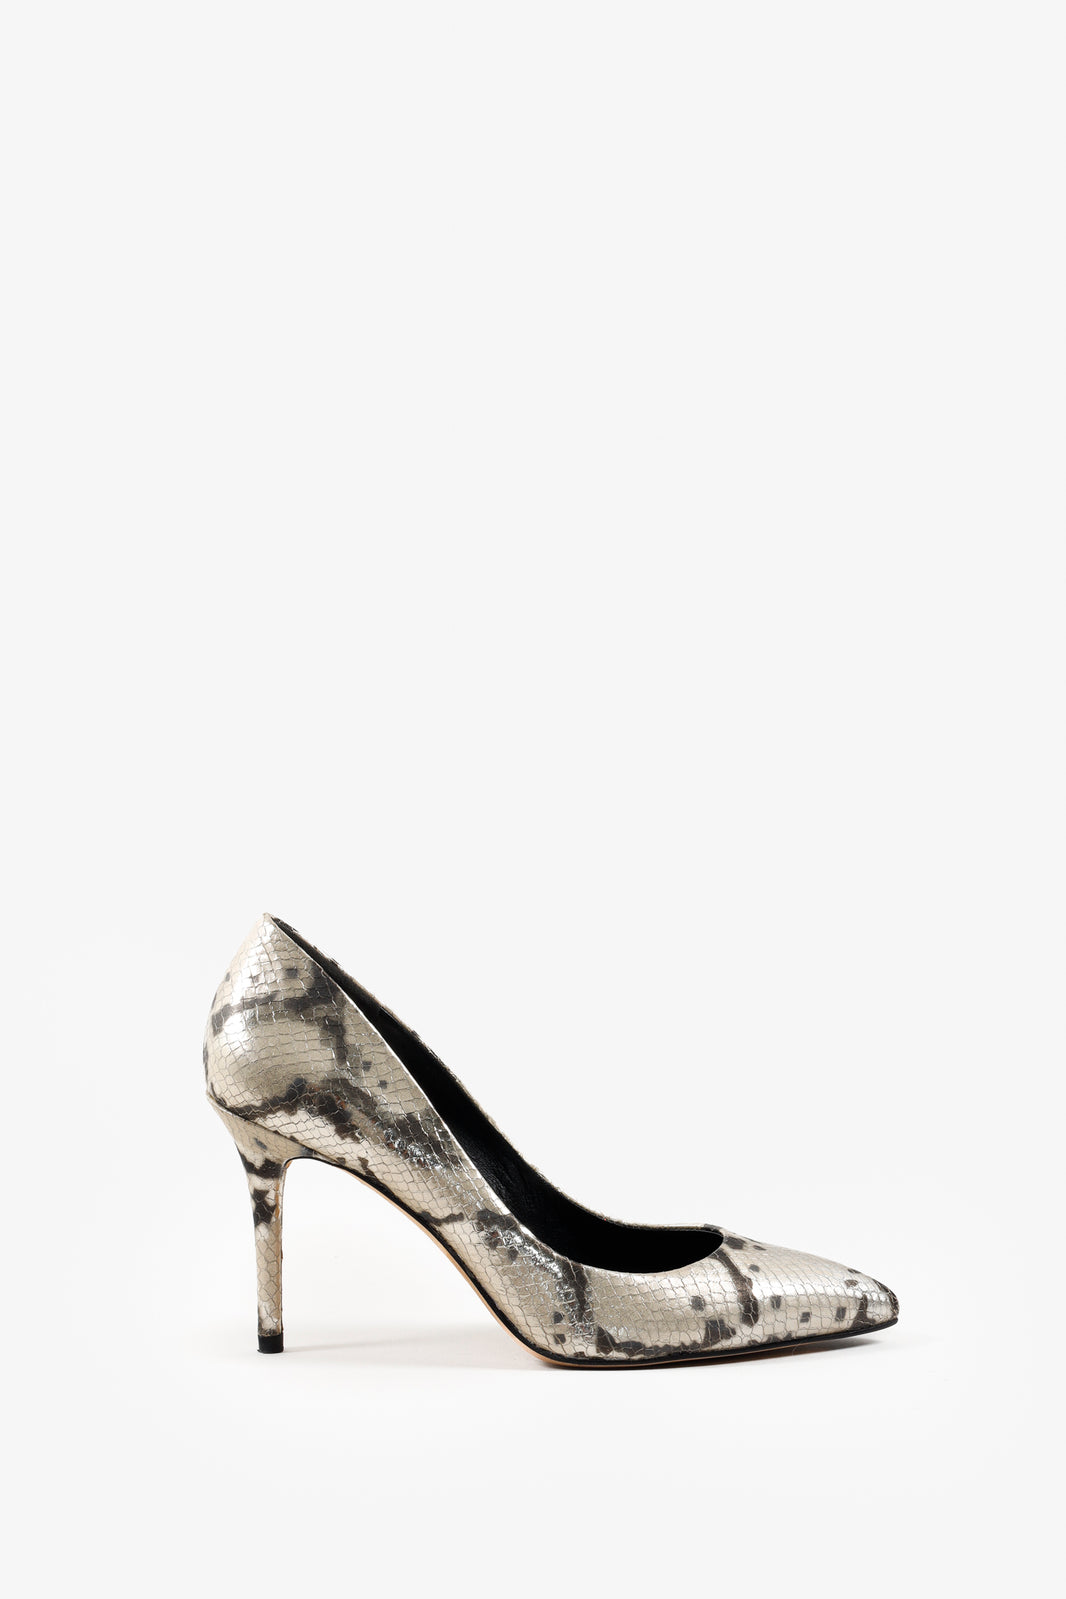 Brian Atwood Gold Snakeskin Pumps